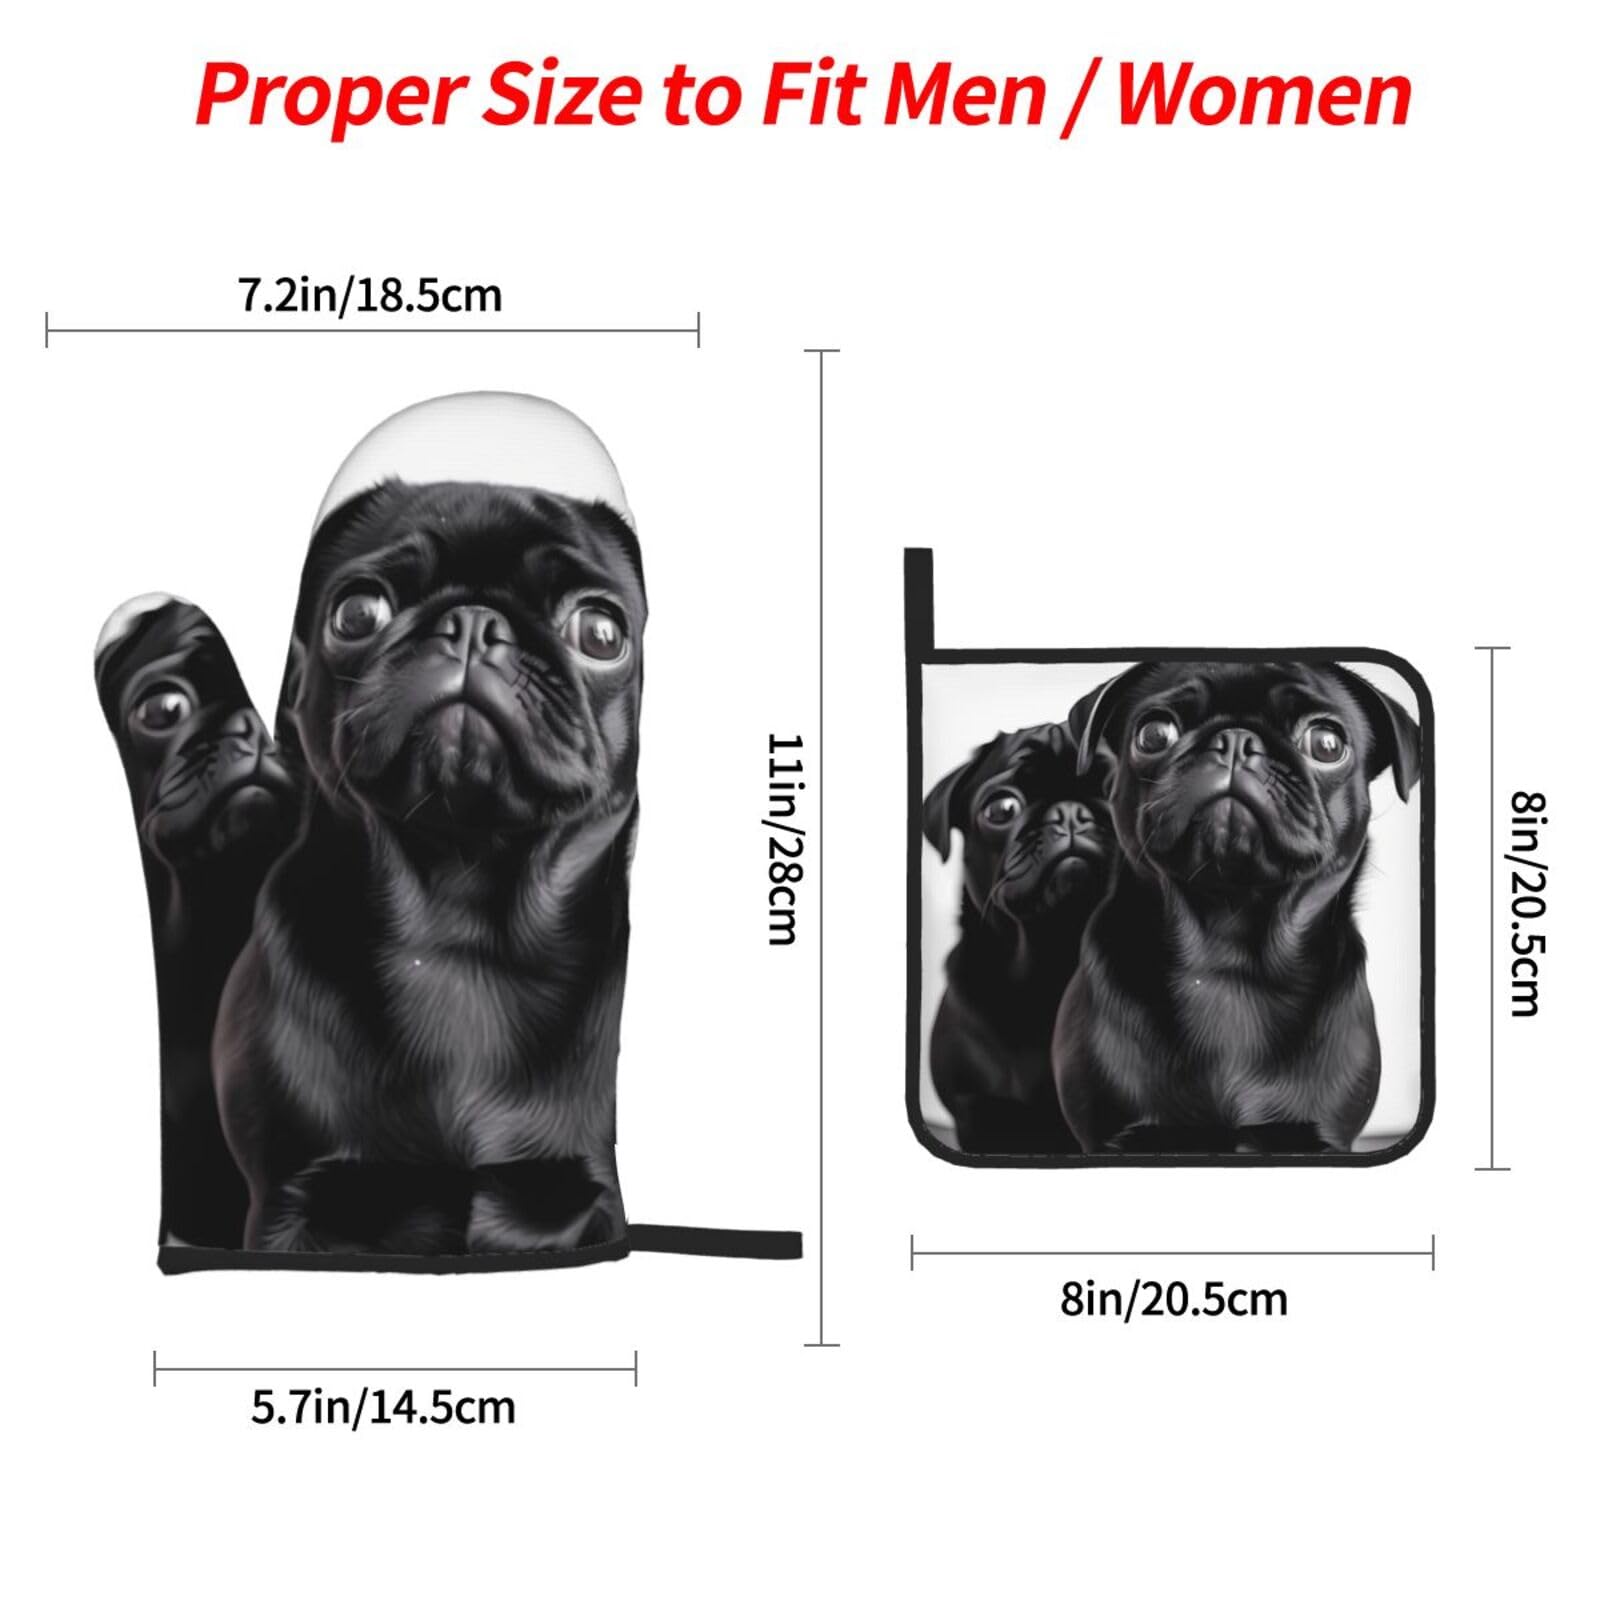 Oven Mitts and Pot Holders Set of 4 Cute Black Pug Dog Print Kitchen Oven Glove Fashion Heat Resistant Oven Gloves Set for BBQ Grill Baking Cooking Oven Microwave